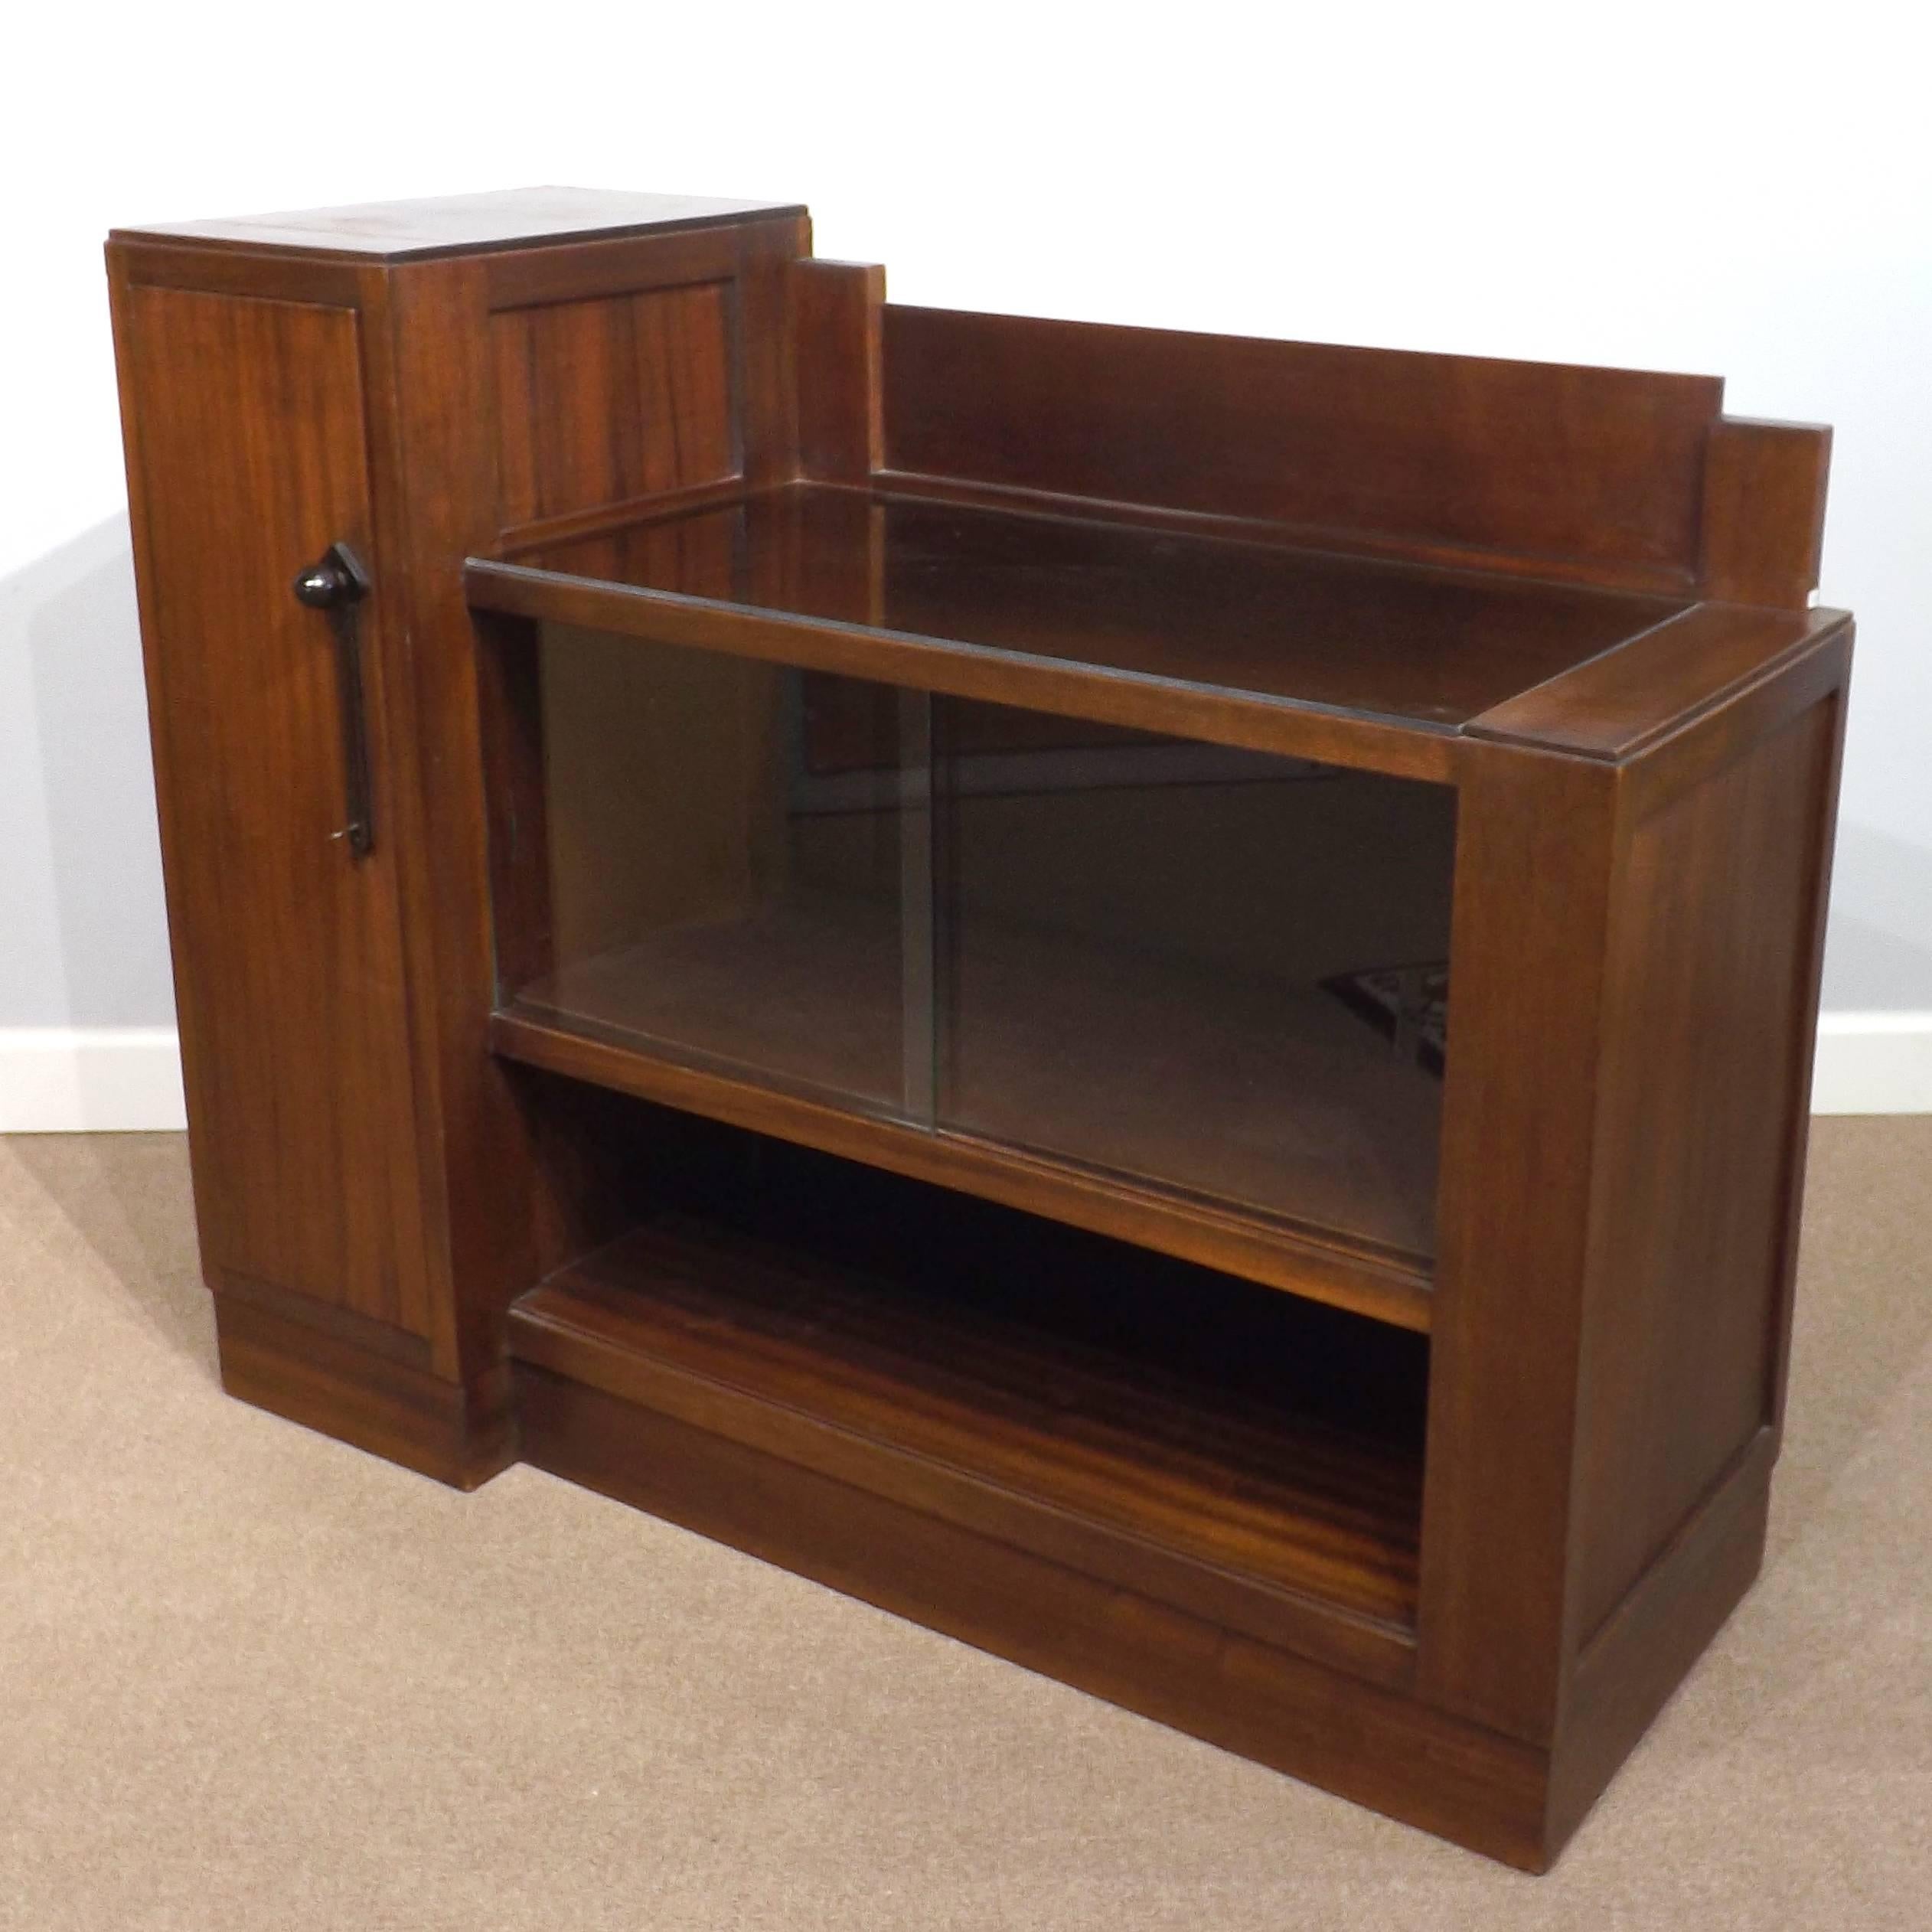 A fine dry bar or liquor cabinet suitable for entertaining in a small room in the Art Deco style, from the 1920's. With sliding glass doors, and a serving area covered with glass in case of spills. Side door has an styled macassar ebony pull and